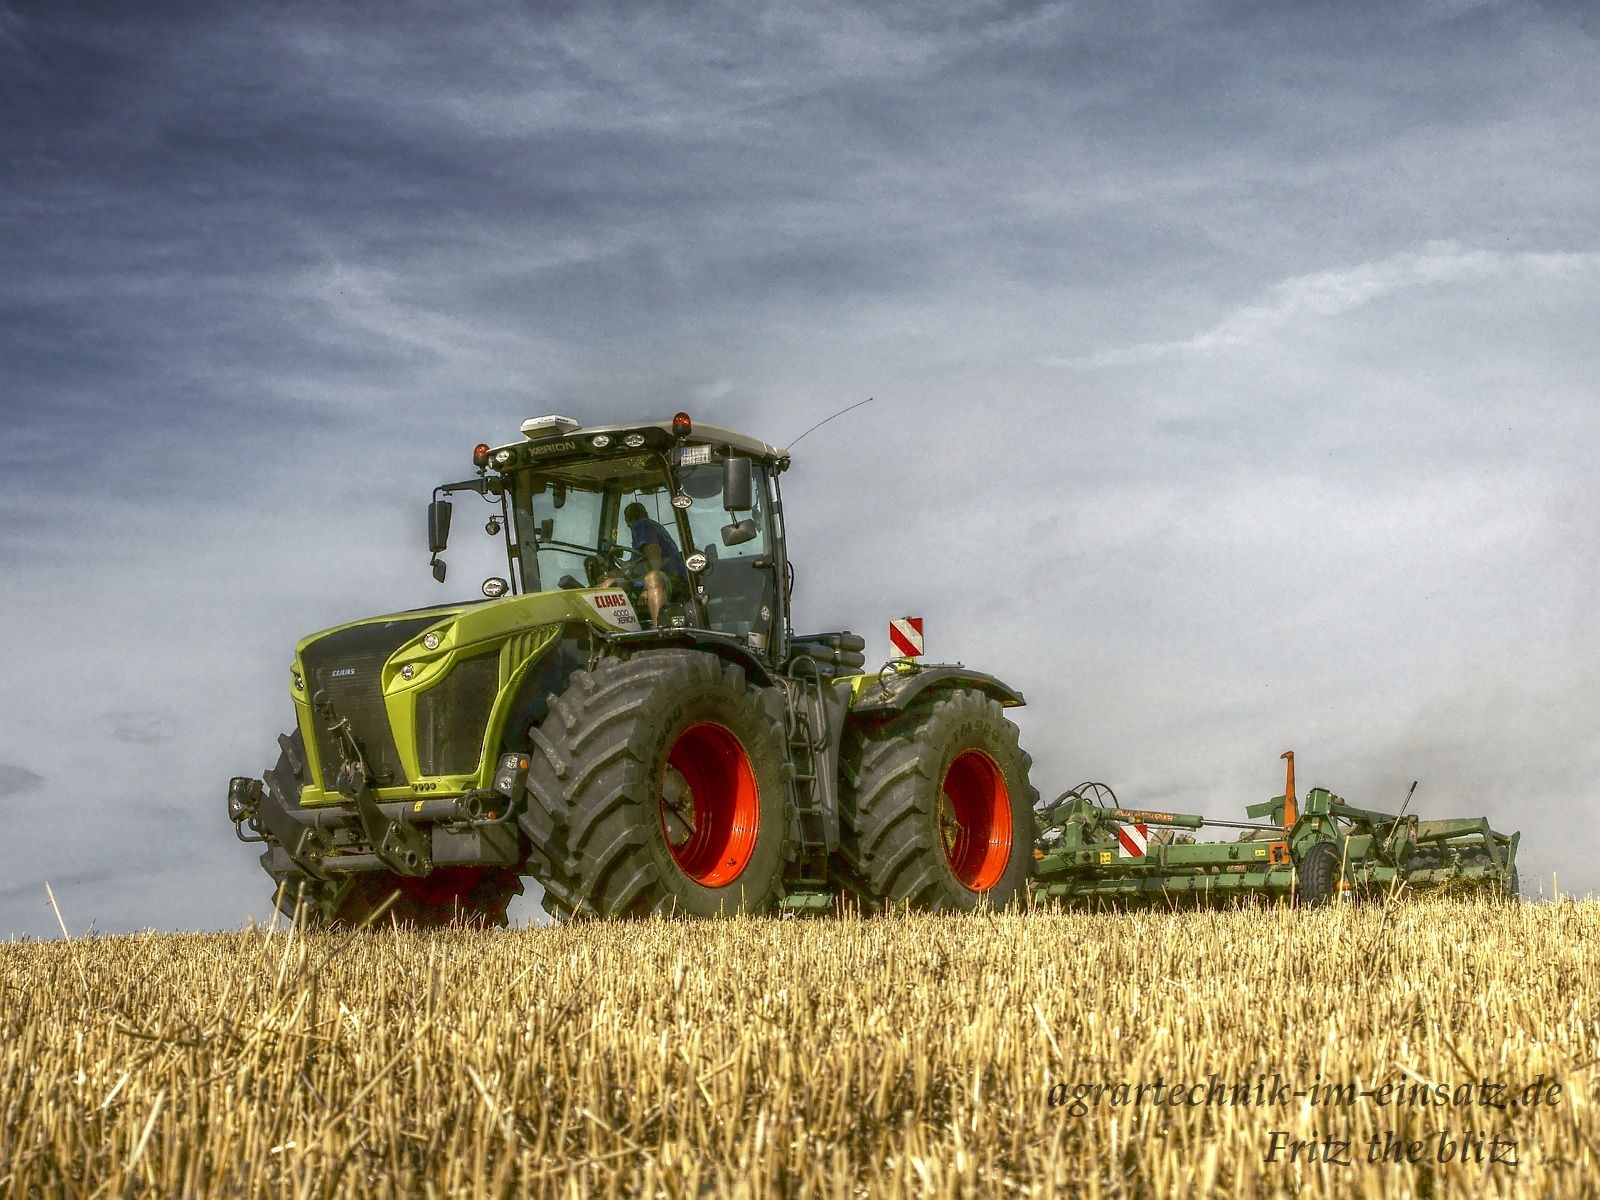 claas wallpaper,field,harvester,agriculture,agricultural machinery,harvest